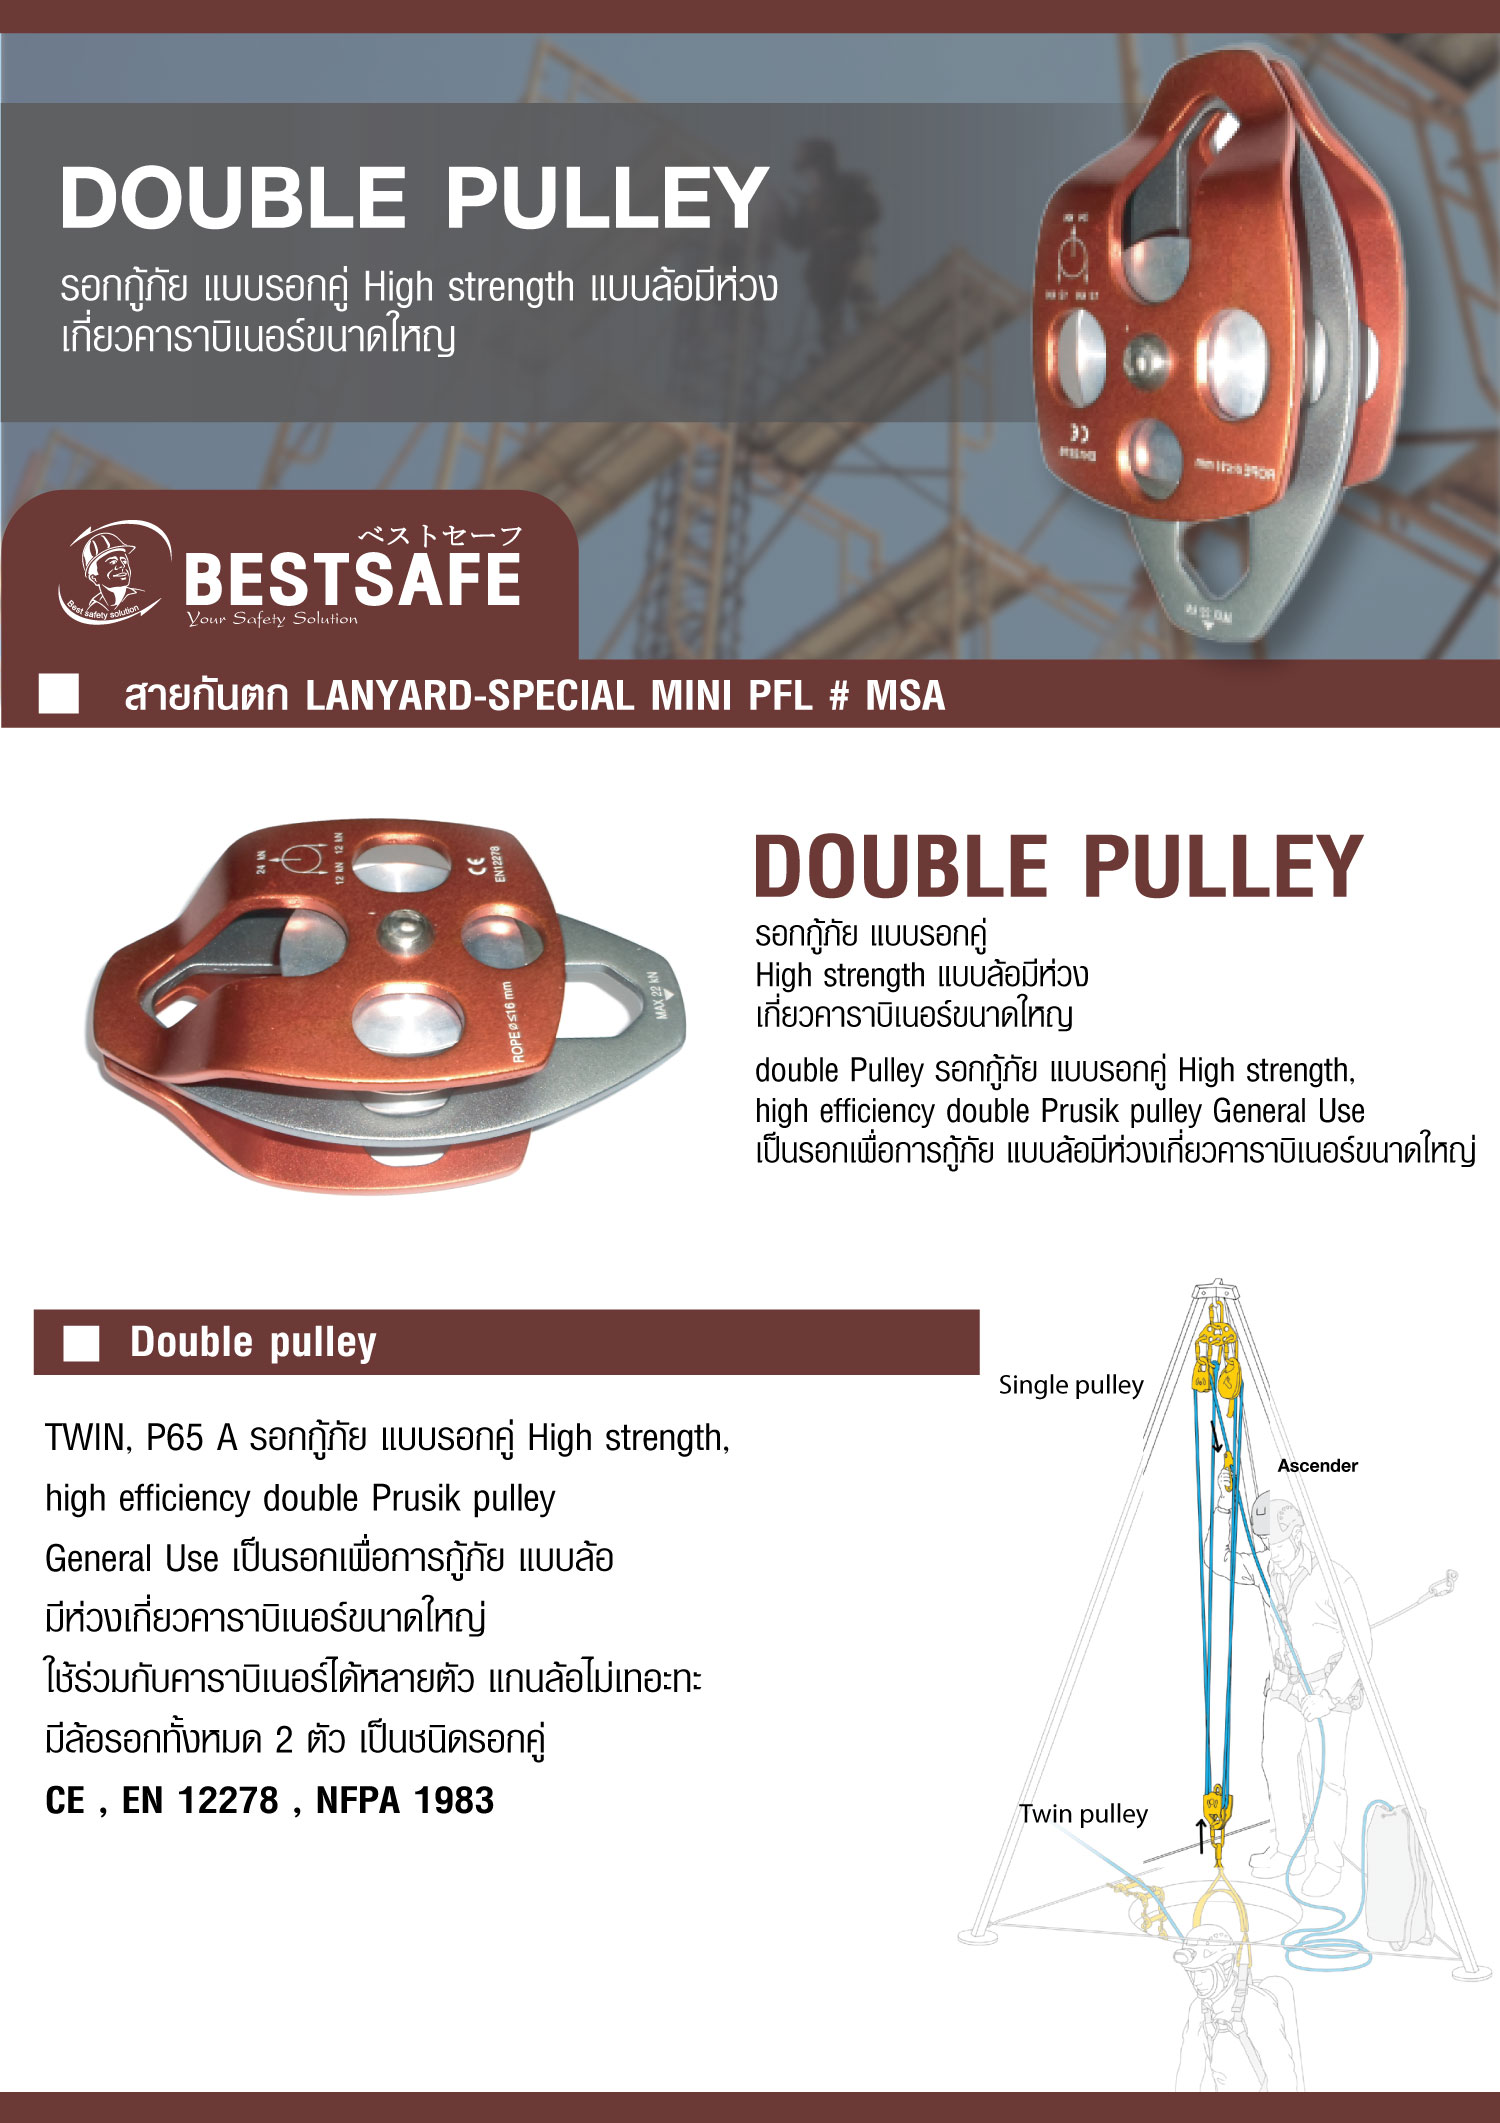 Sec 62 TWIN Pulley 01